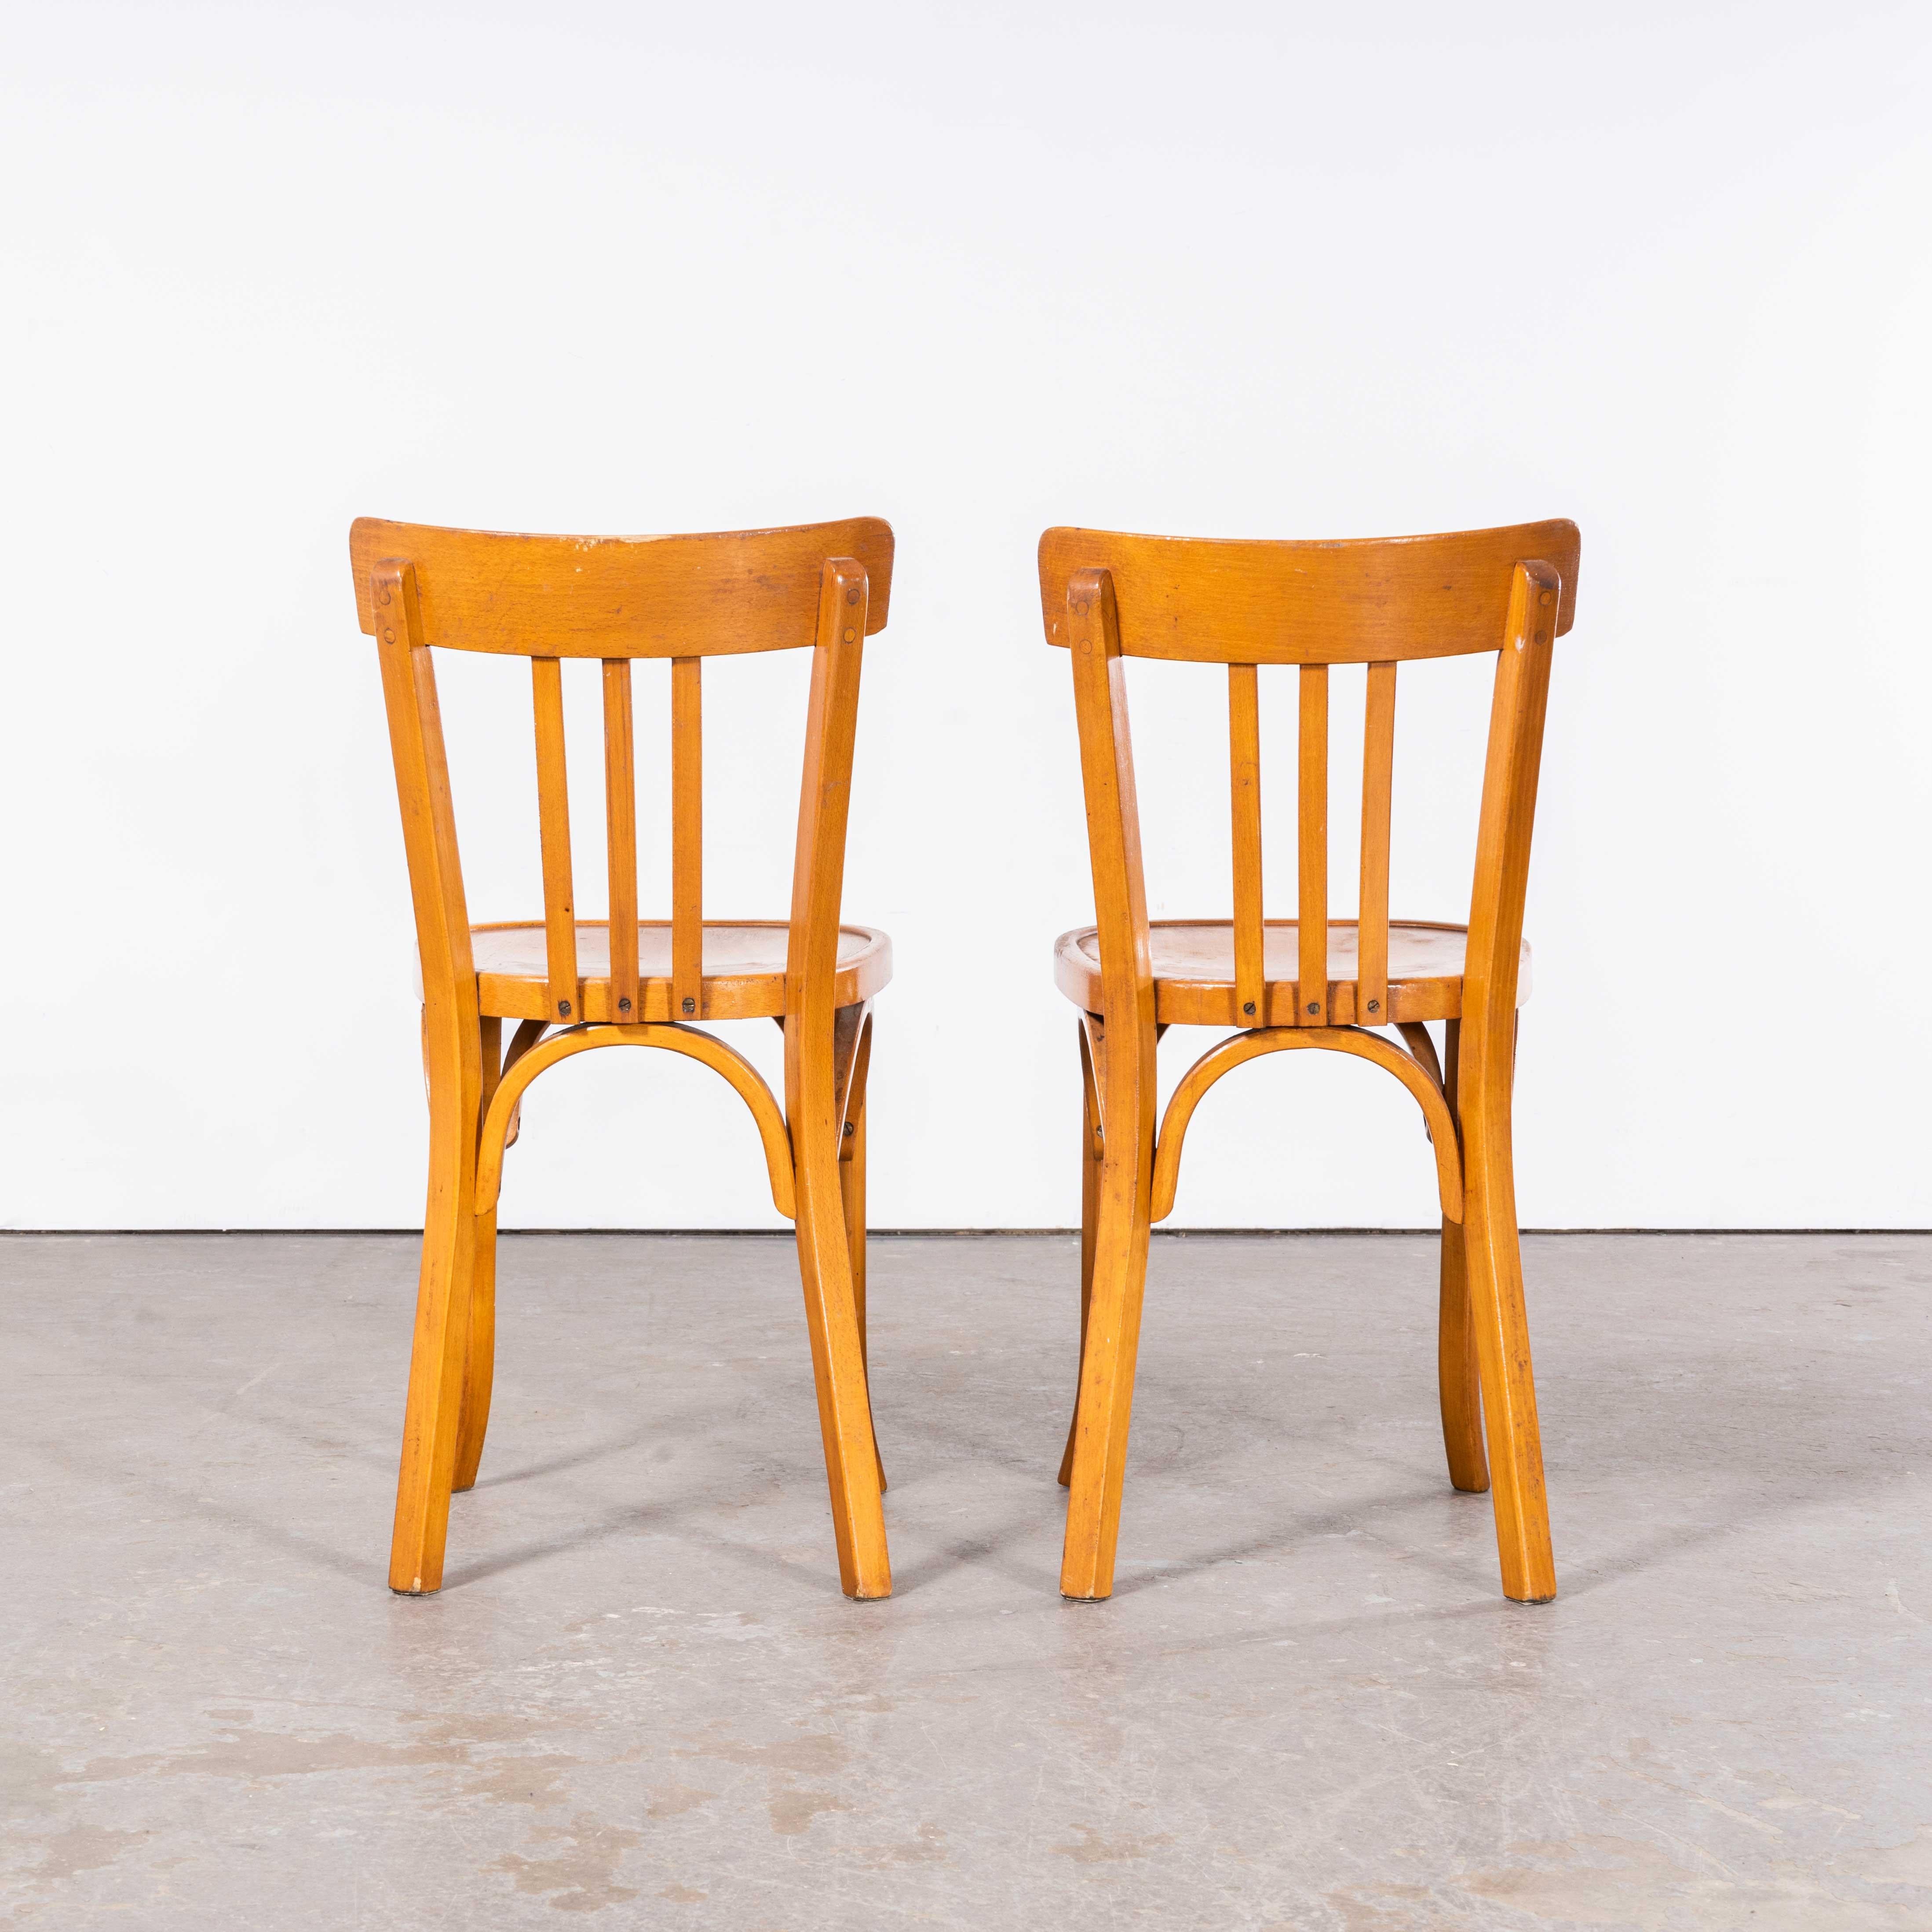 1950's Baumann Bentwood Tri Back Bistro Dining chair - Honey - Pair For Sale 2